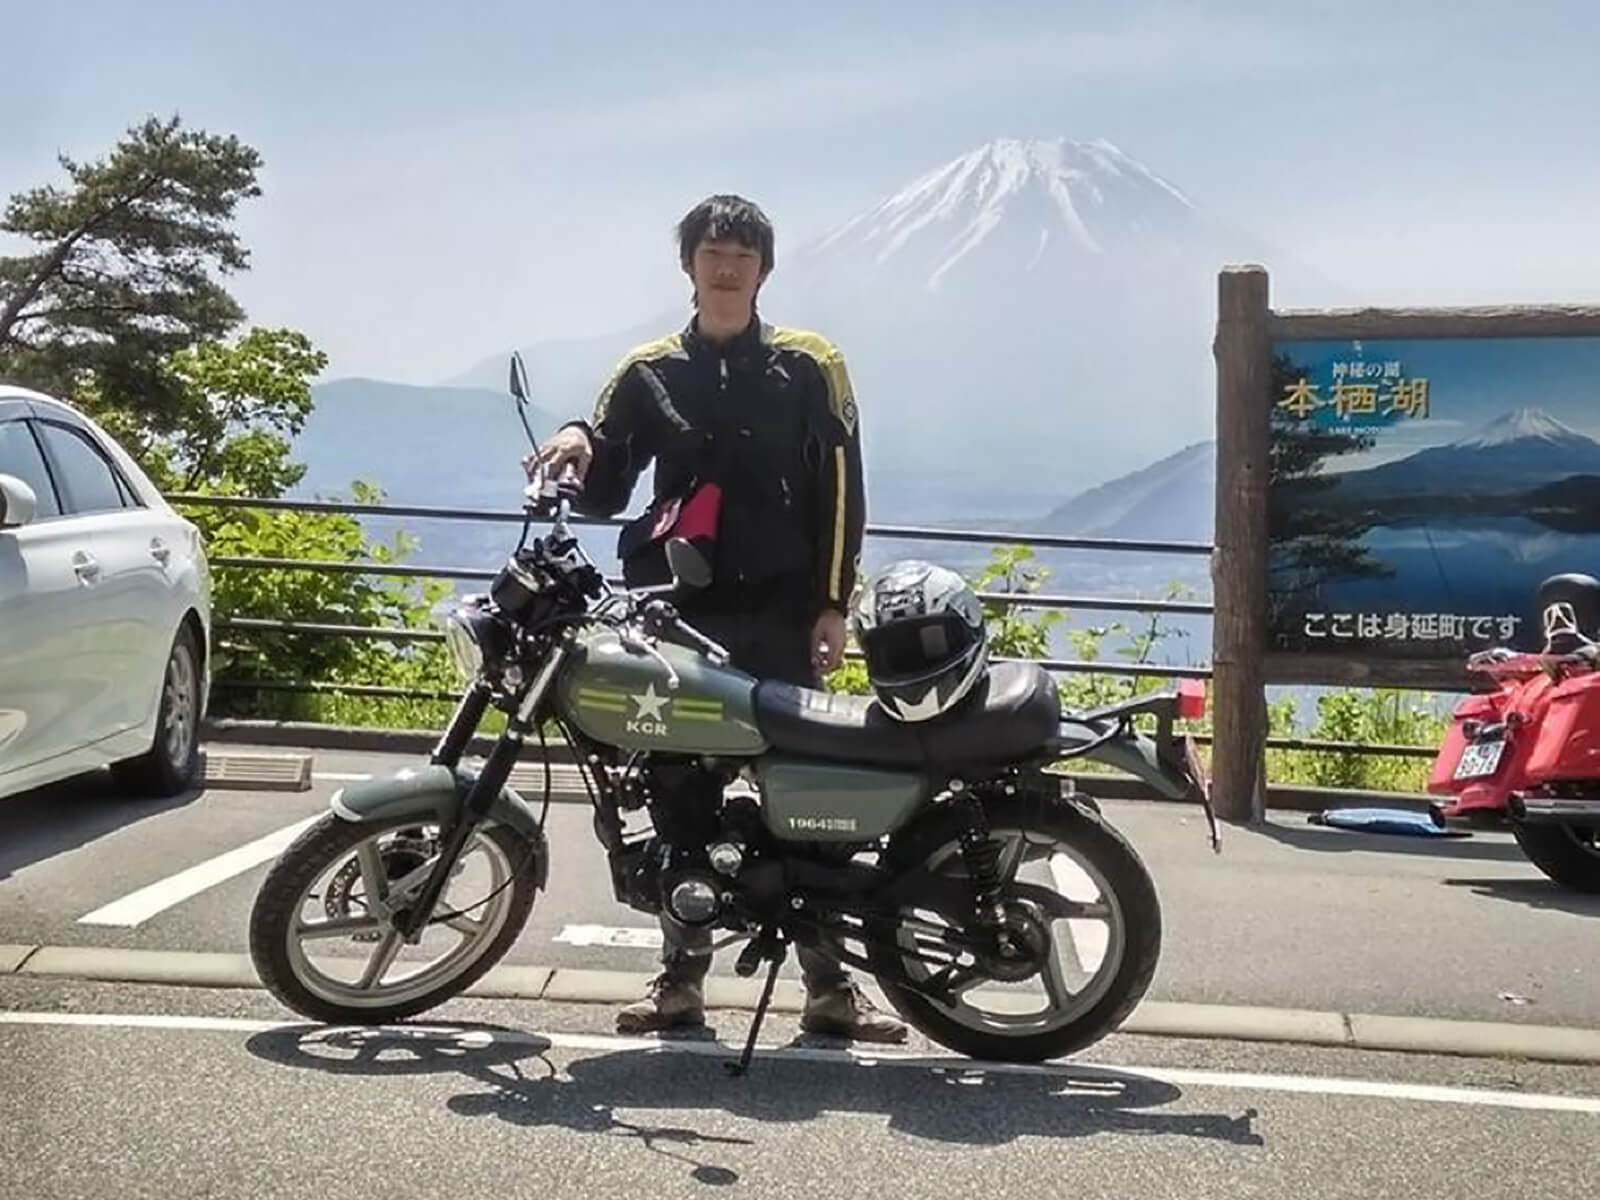 DigiPen (Singapore) alumnus Max Chew poses with a motorcycle, with a mountain in the background